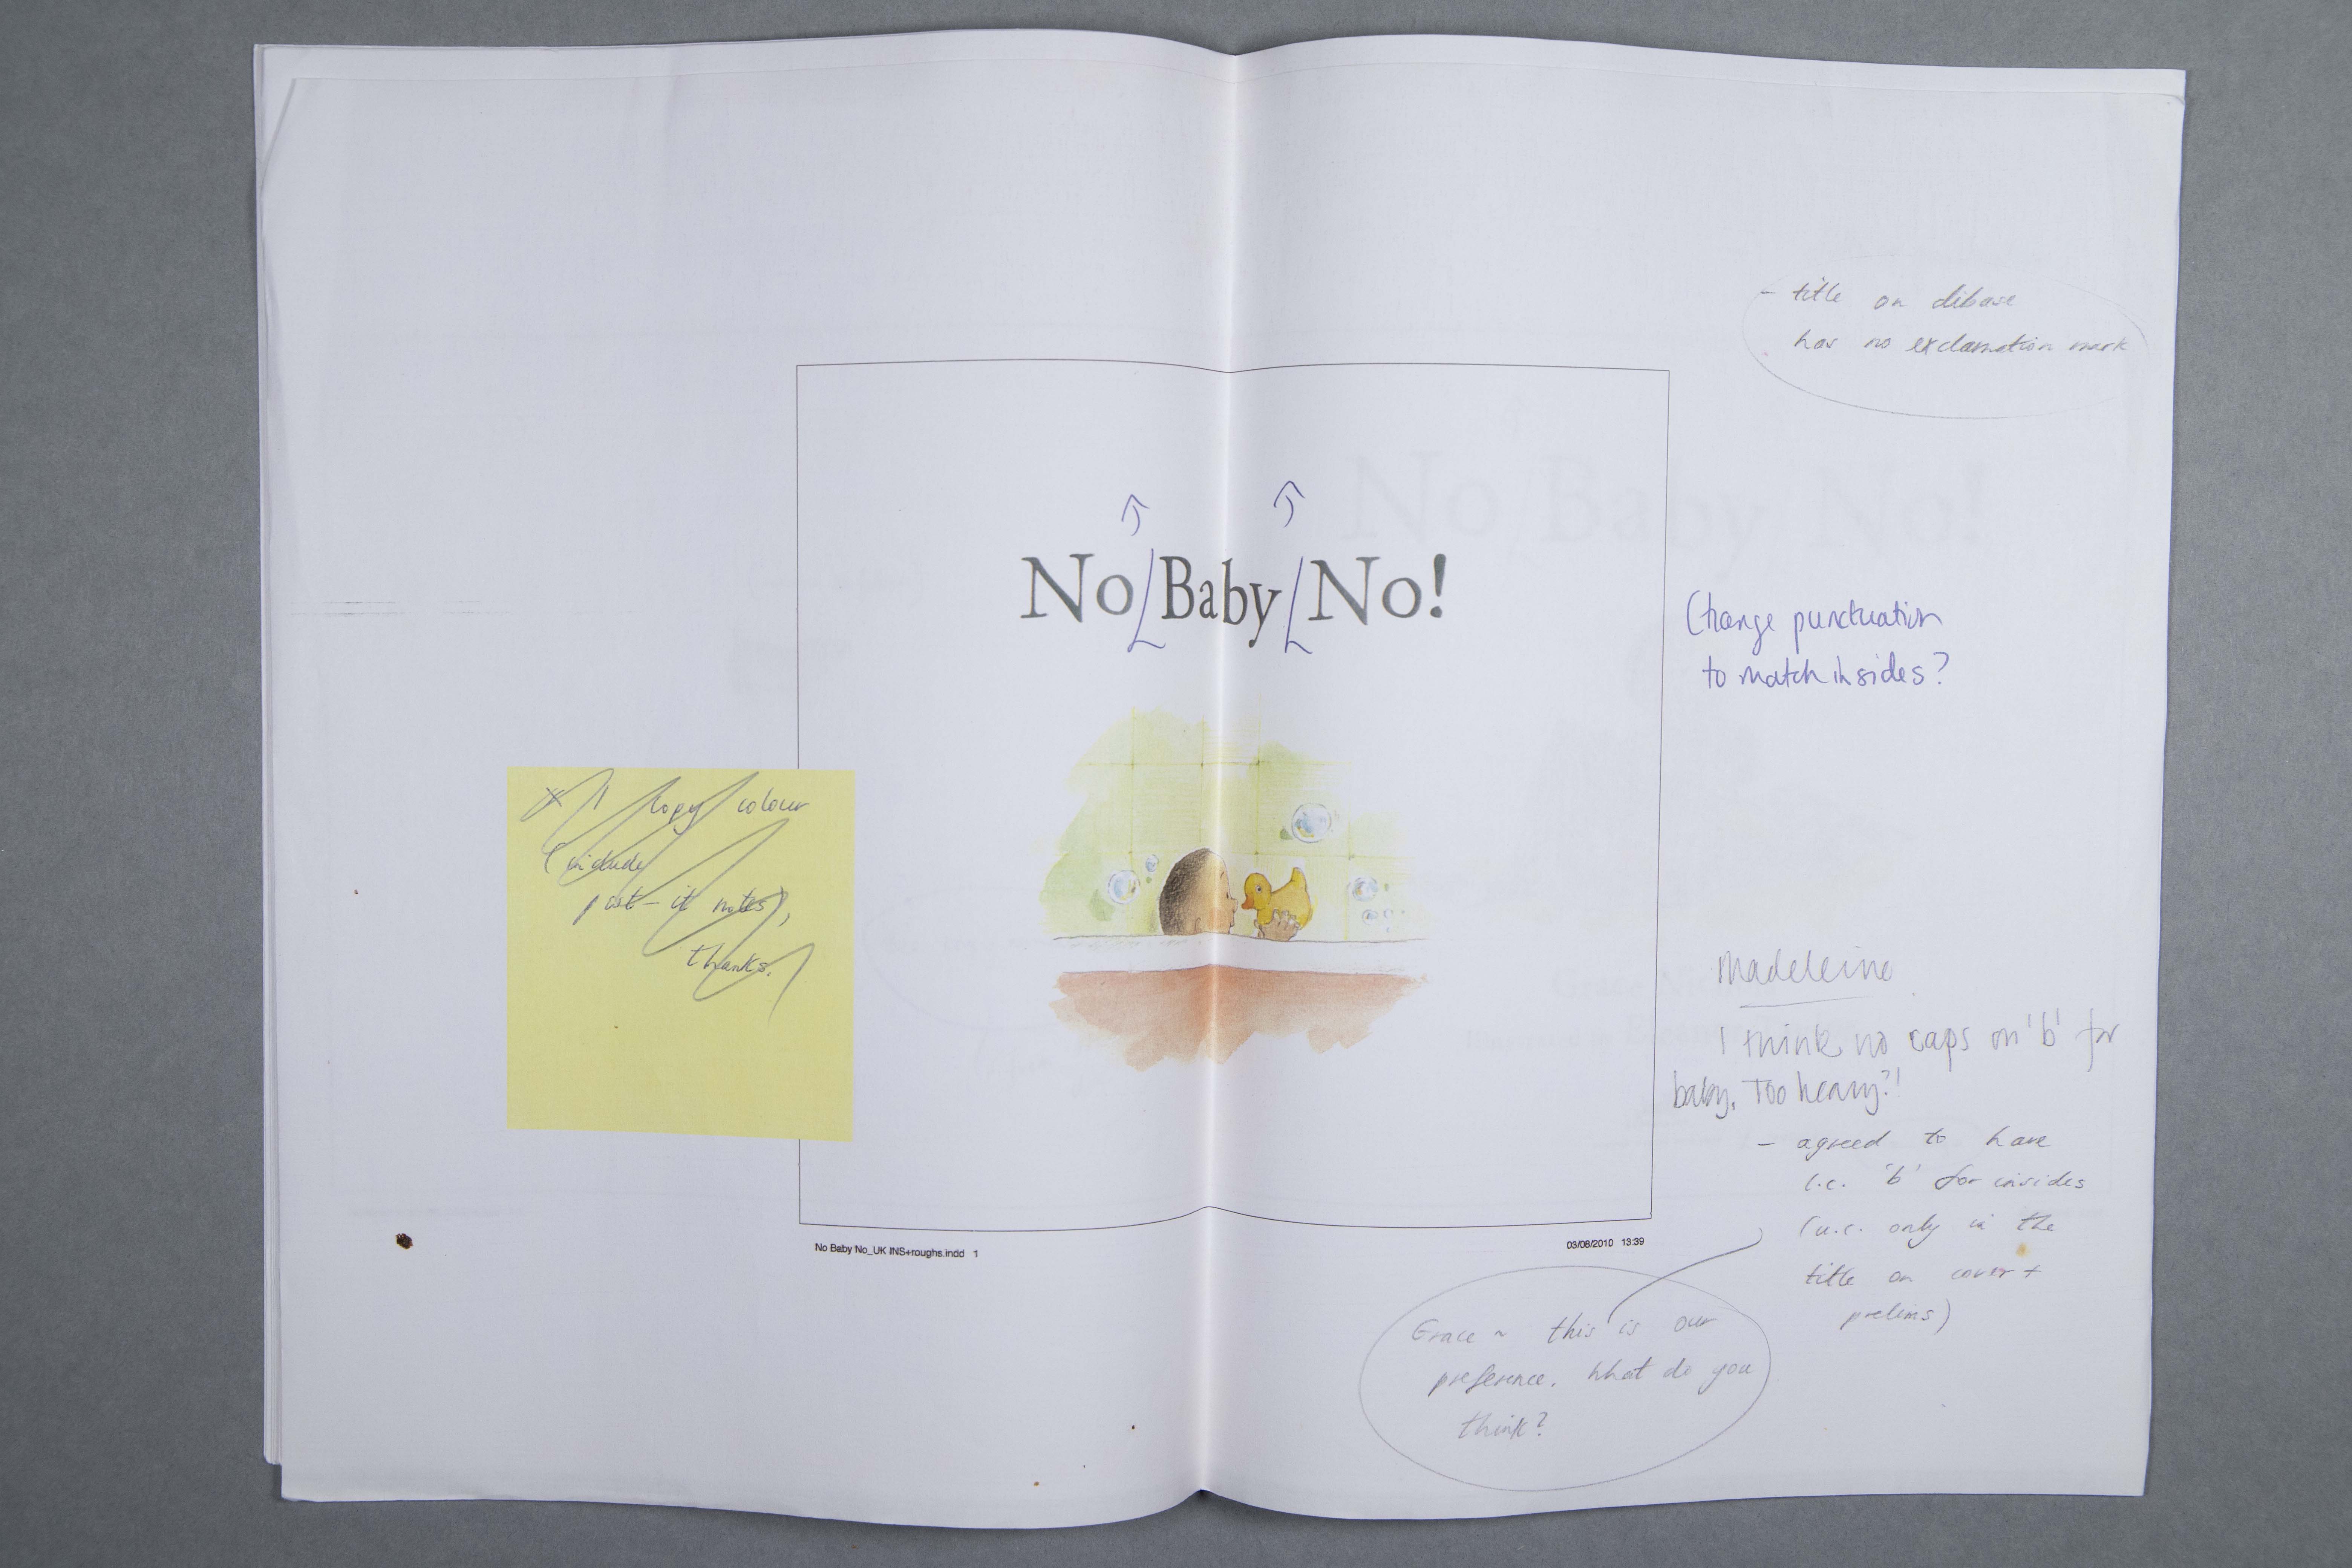 A printer's proof for 'No, baby, no!' (2011) with manuscript annotations.